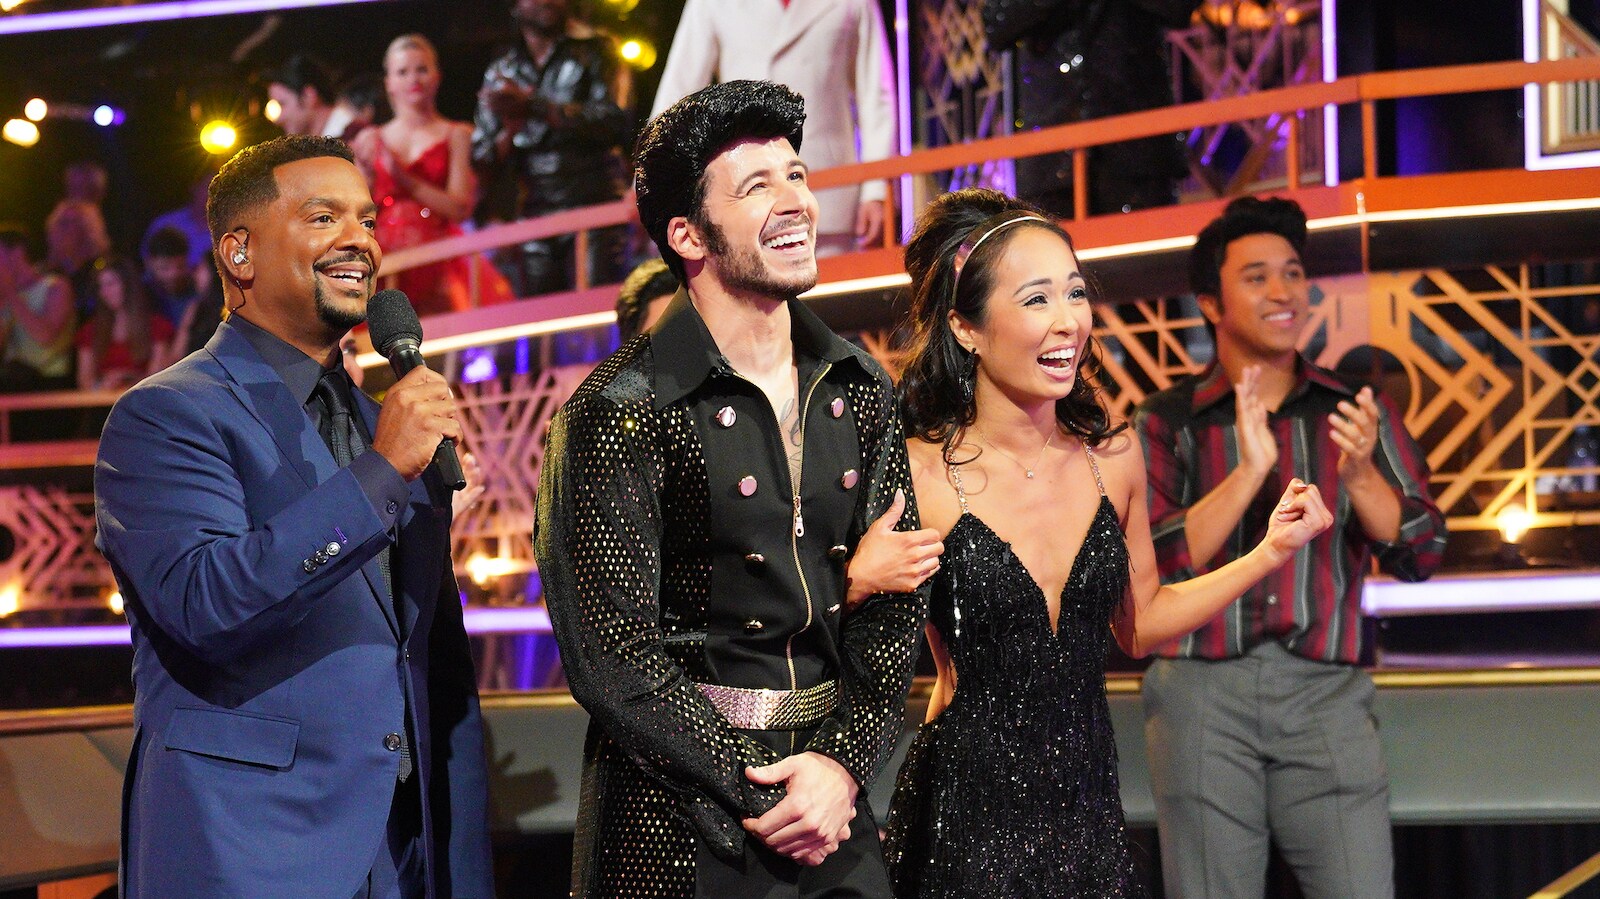 DANCING WITH THE STARS - “Elvis Night” –  The 15 remaining couples “Can’t Help Falling in Love” with Elvis this week as they take on all-new dance styles to music by The King of Rock ‘n’ Roll. Week two of the mirorrball competition will stream live MONDAY, SEPT. 26 (8:00pm ET / 5:00pm PT), on Disney+. (ABC/Christopher Willard) ALFONSO RIBEIRO, VINNY GUADAGNINO, KOKO IWASAKI